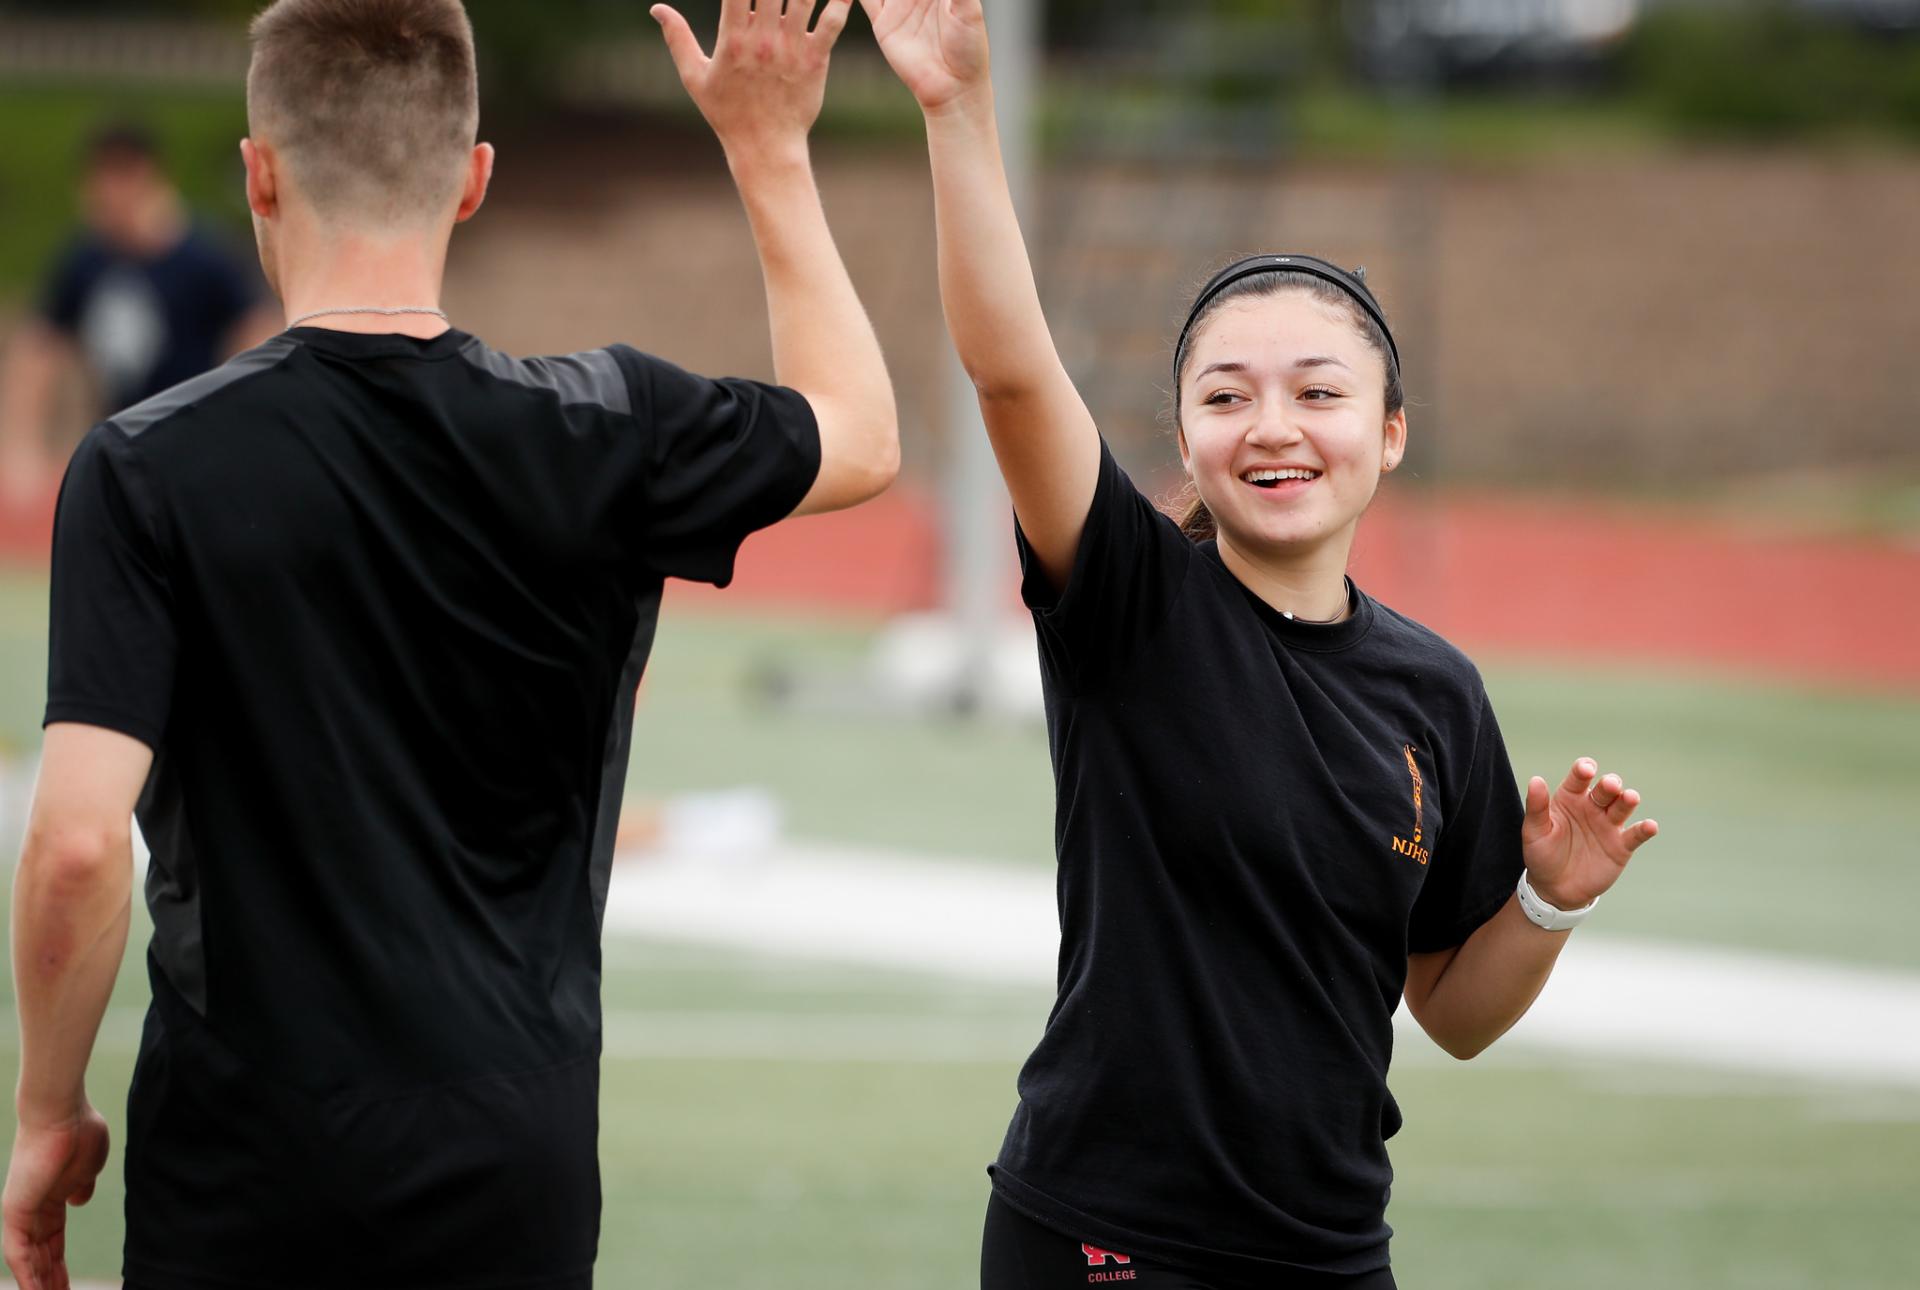 Students high-fiving after winning a roundnet game.